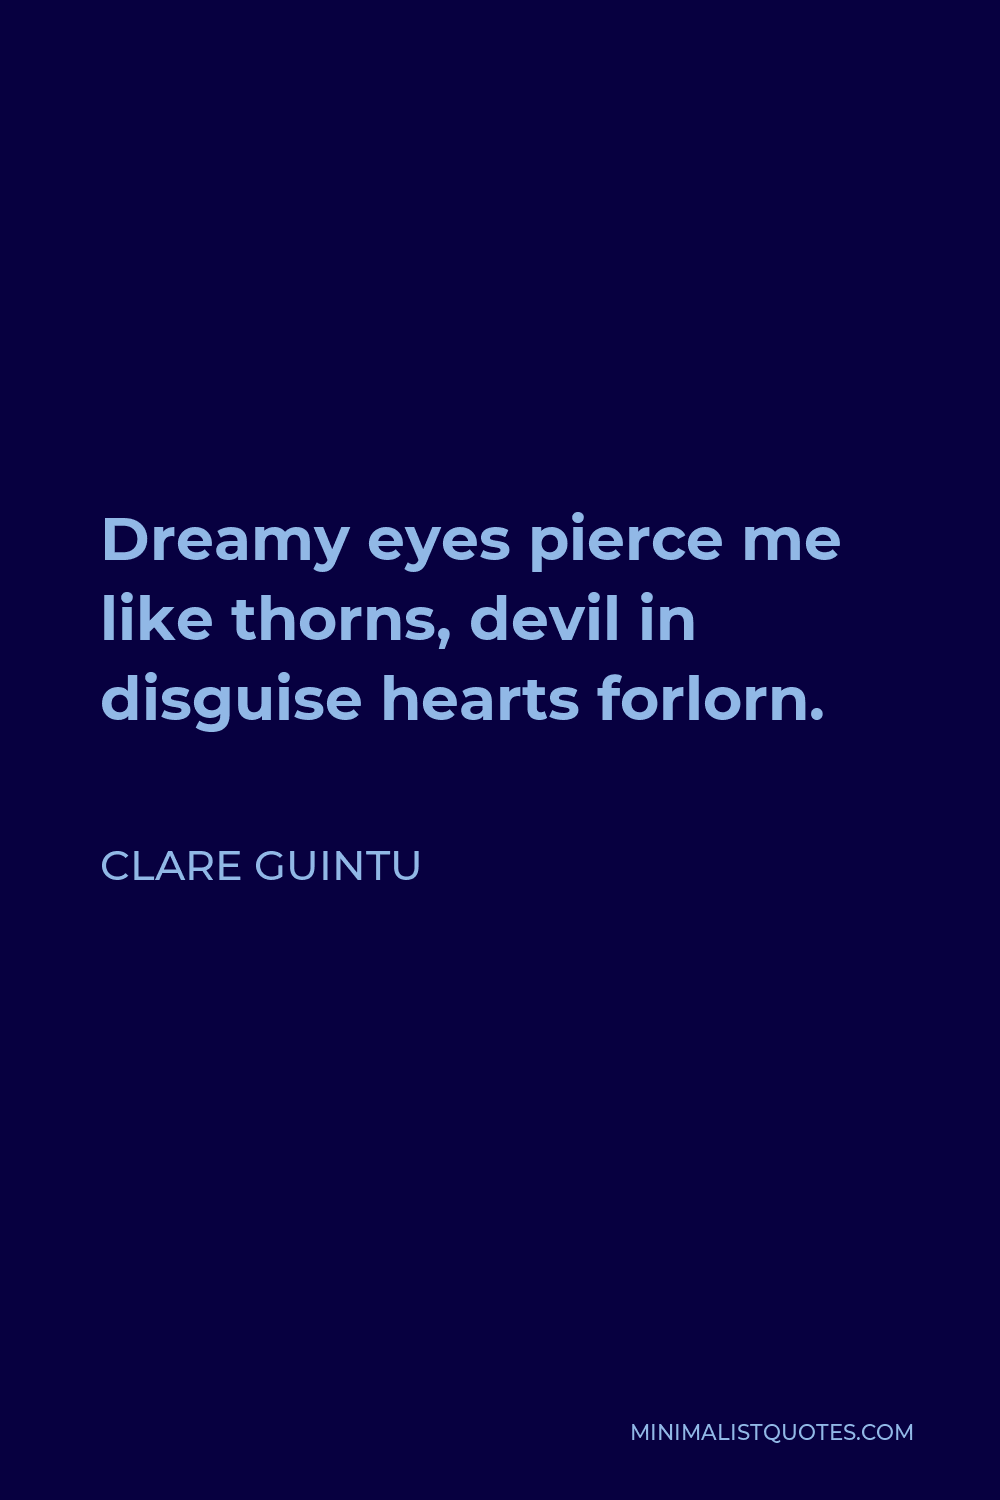 Clare Guintu Quote - Dreamy eyes pierce me like thorns, devil in disguise hearts forlorn.